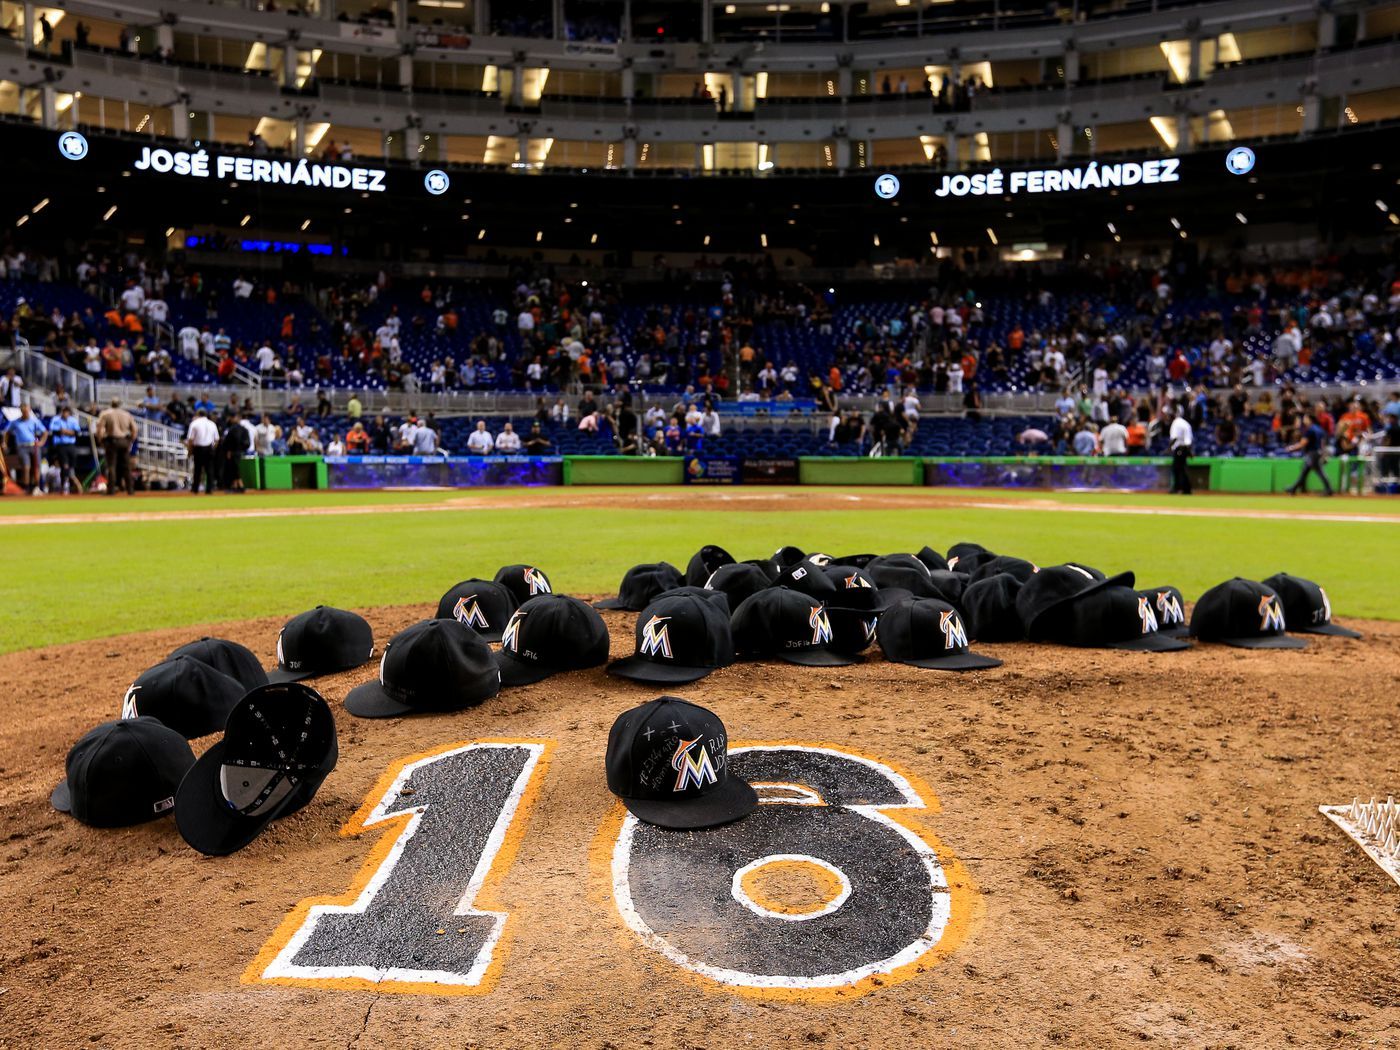 Jose Fernandez had one of the greatest breaking balls ever